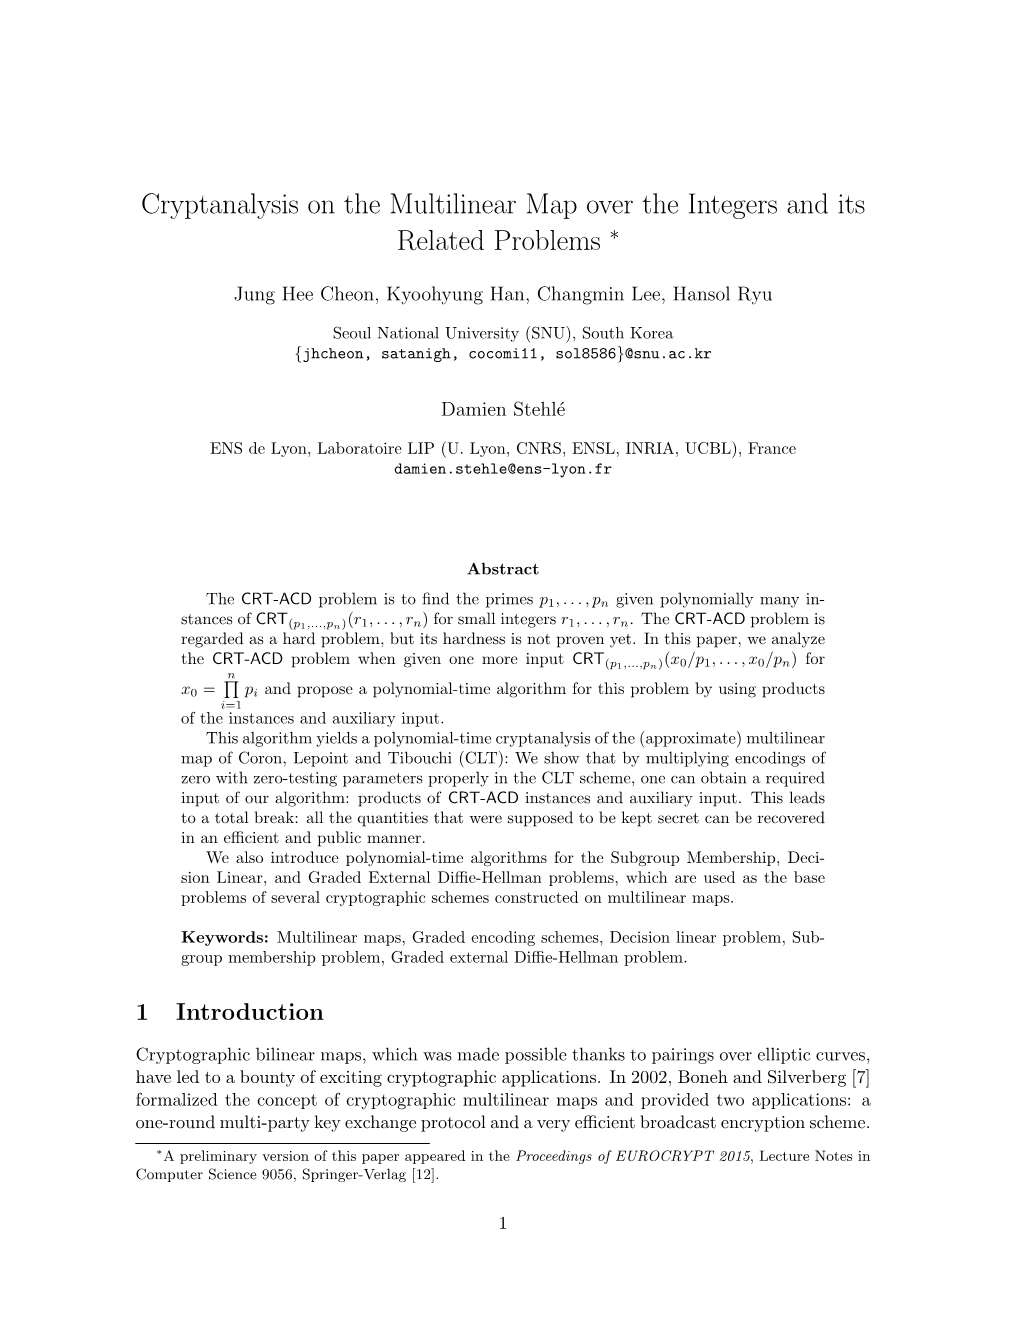 Cryptanalysis on the Multilinear Map Over the Integers and Its Related Problems ∗